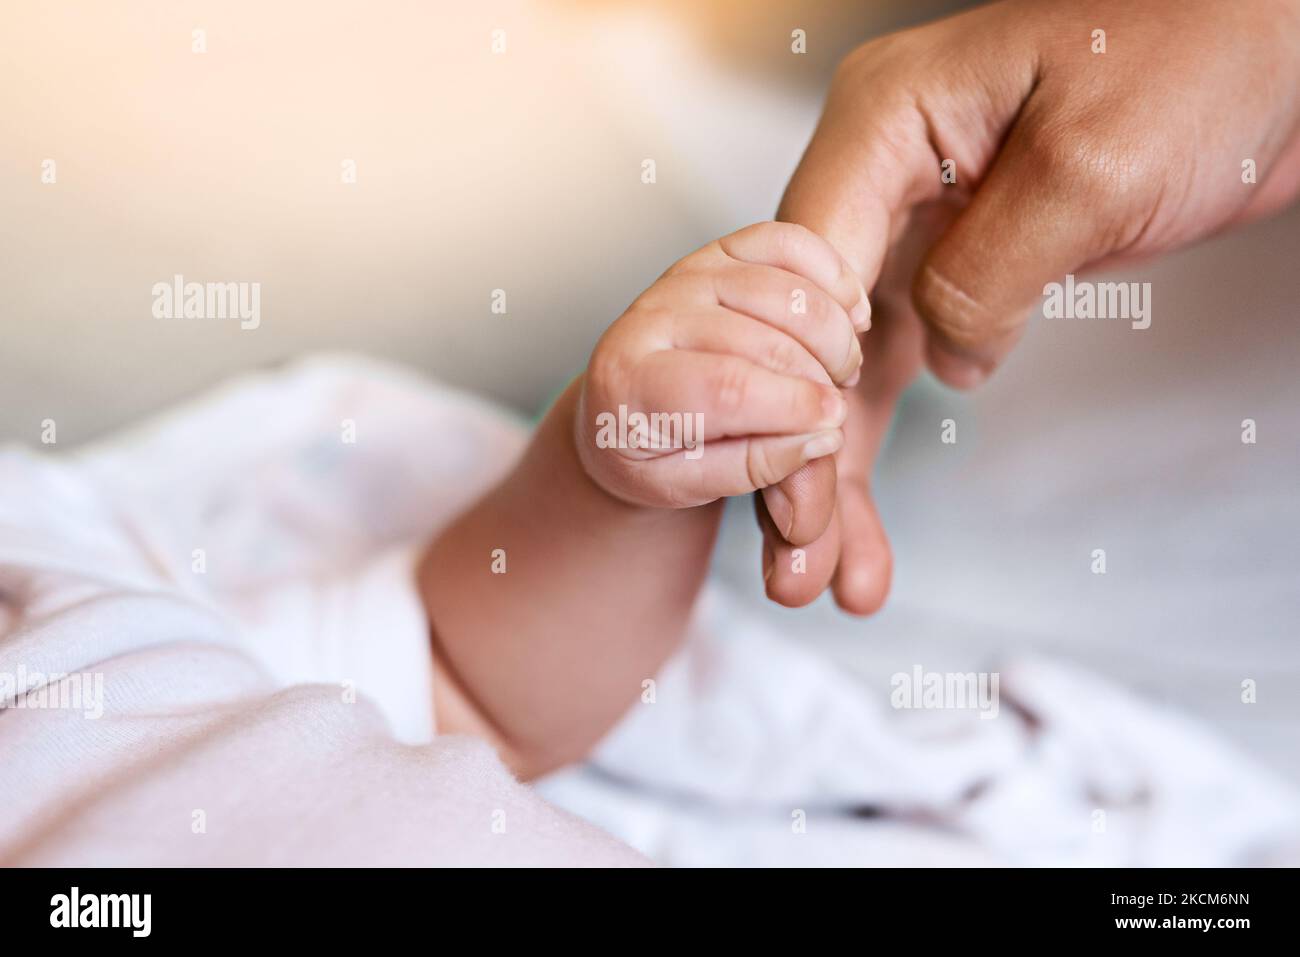 When a baby grips your finger, priceless. mother holding her newborn babys hand. Stock Photo